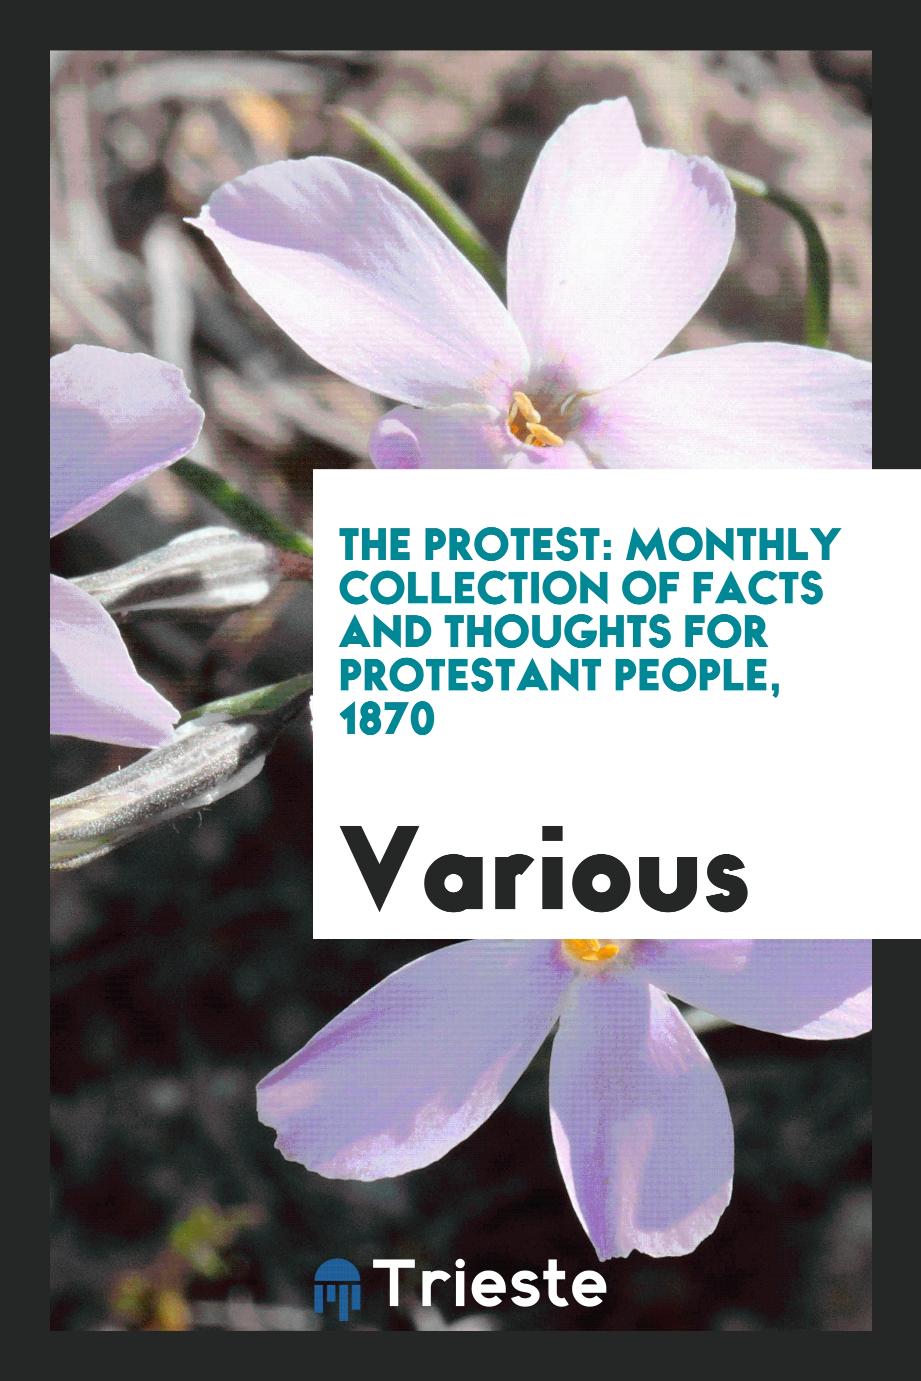 The Protest: monthly collection of facts and thoughts for Protestant people, 1870